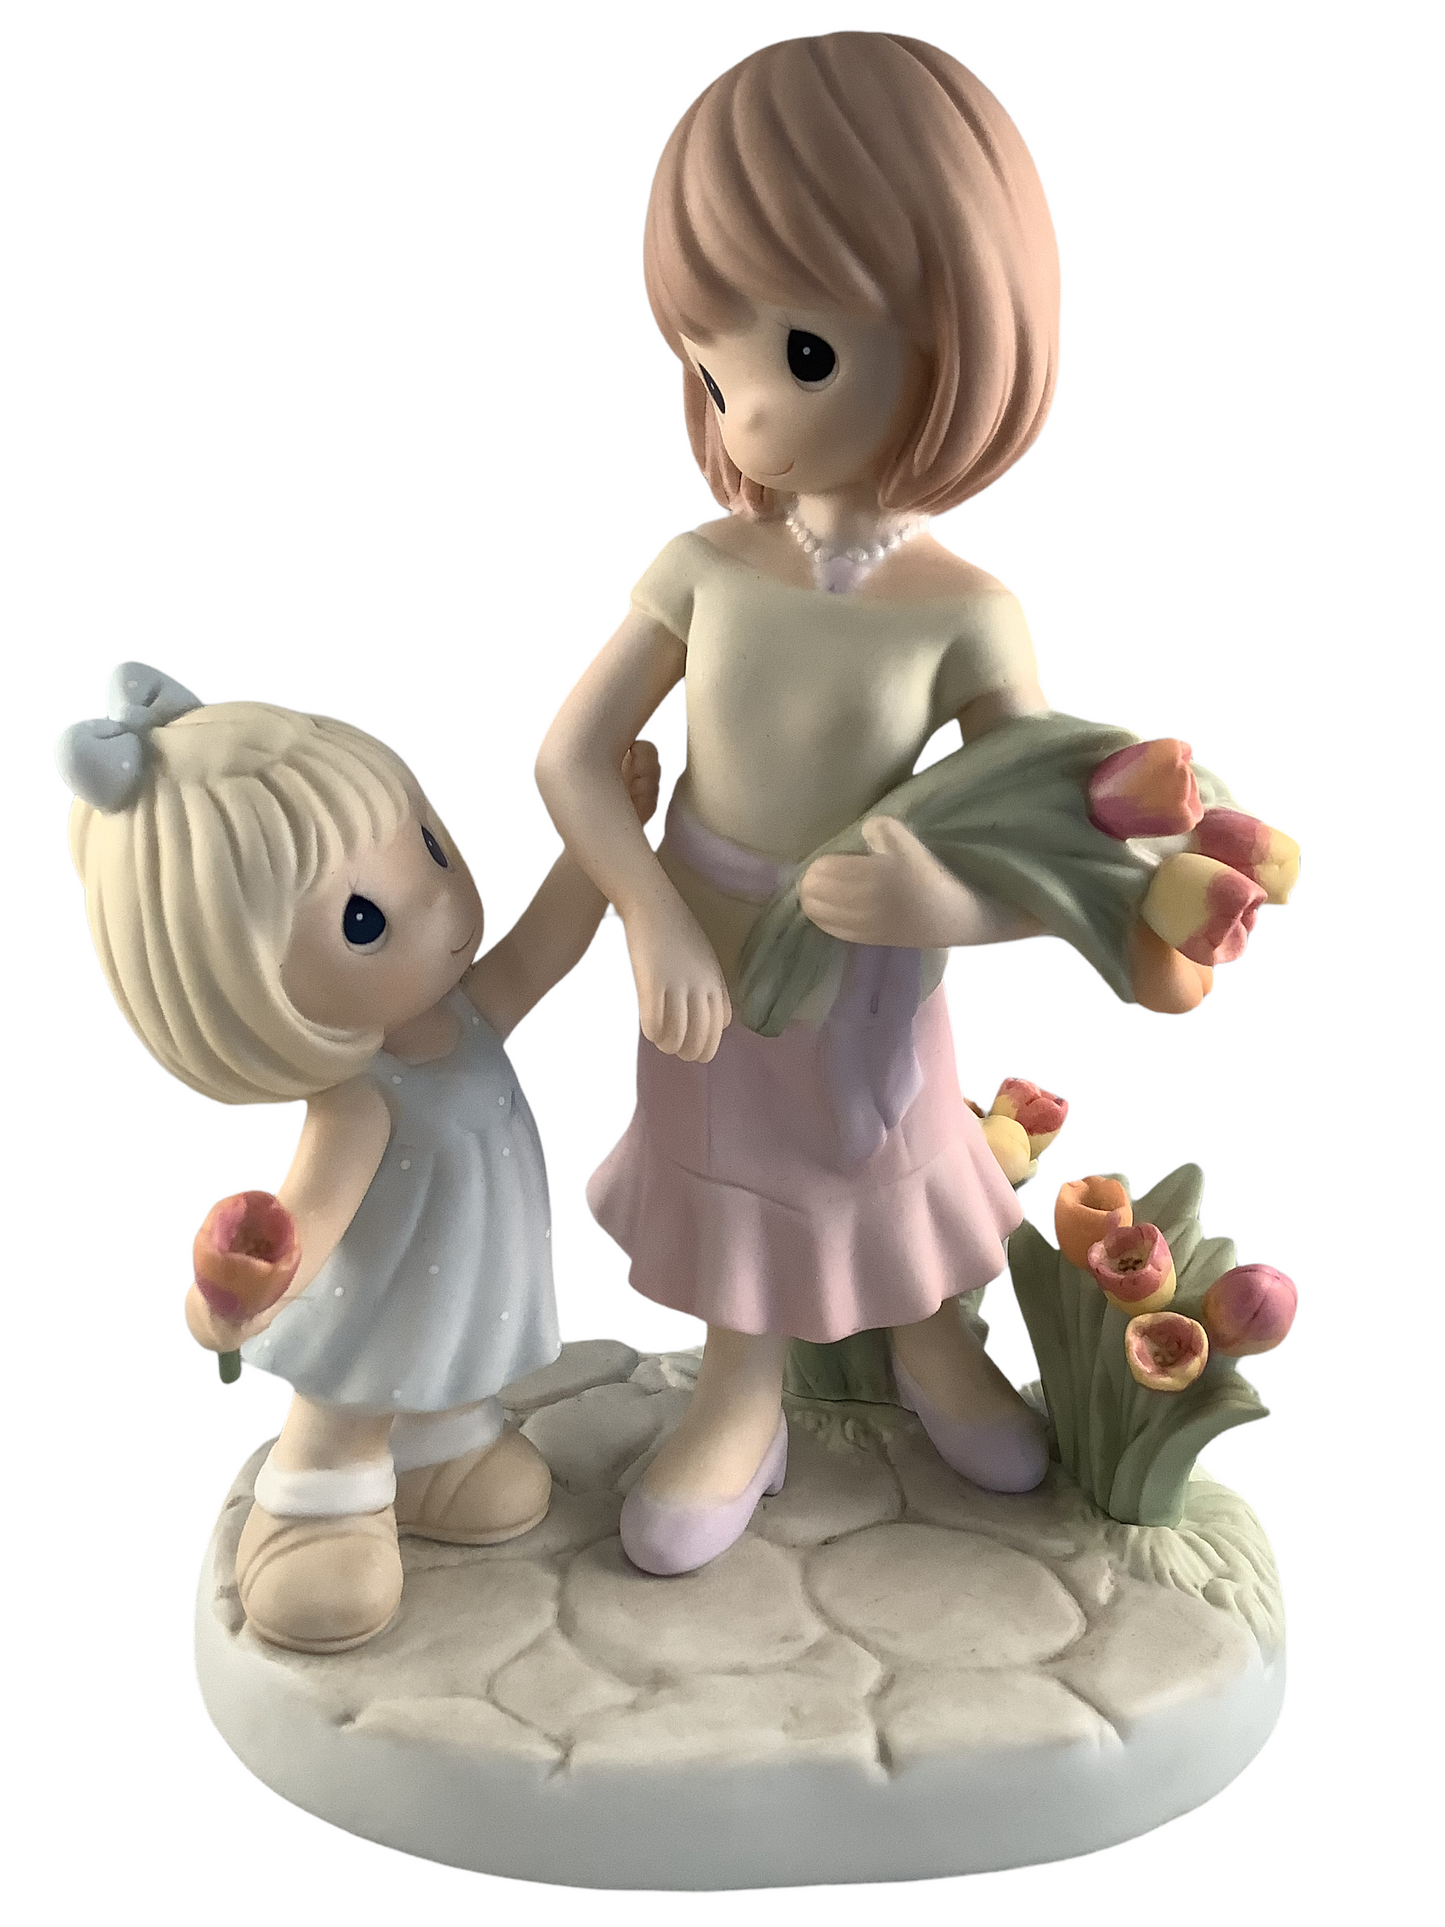 Gentle Is A Mother's Love - Precious Moment Figurine